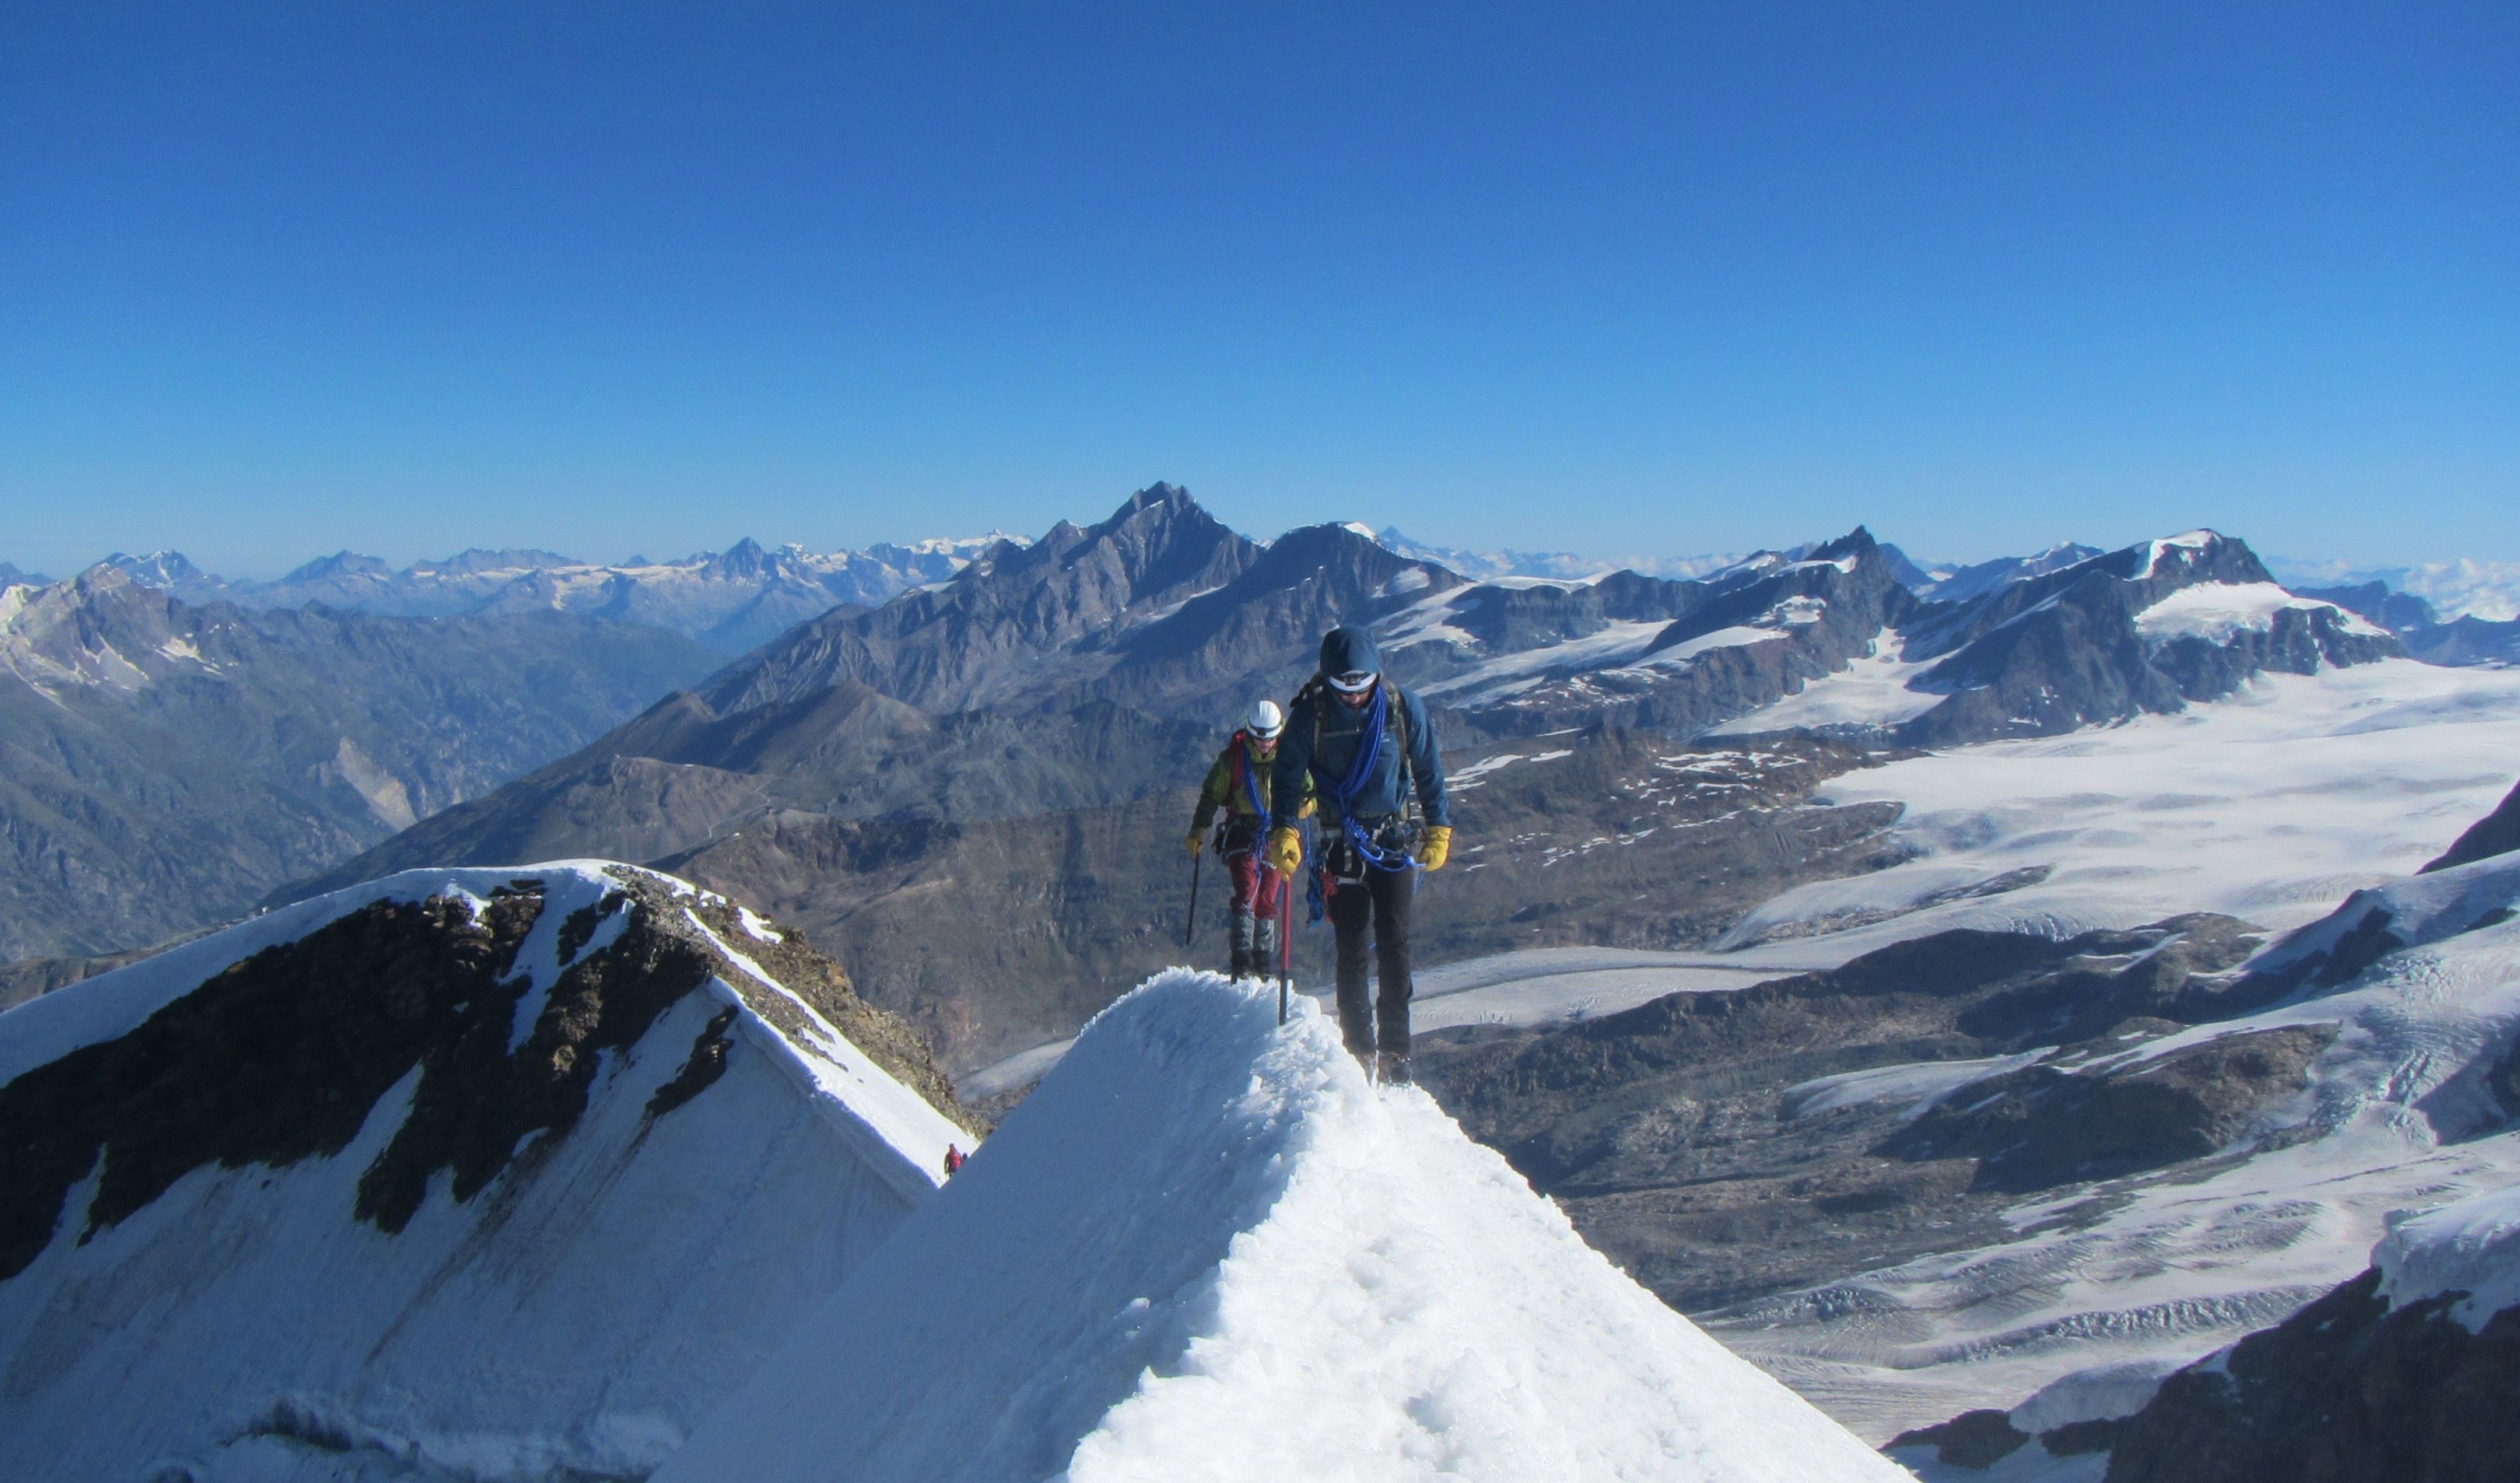 Two students mountaineering in the Monte Rosa massif